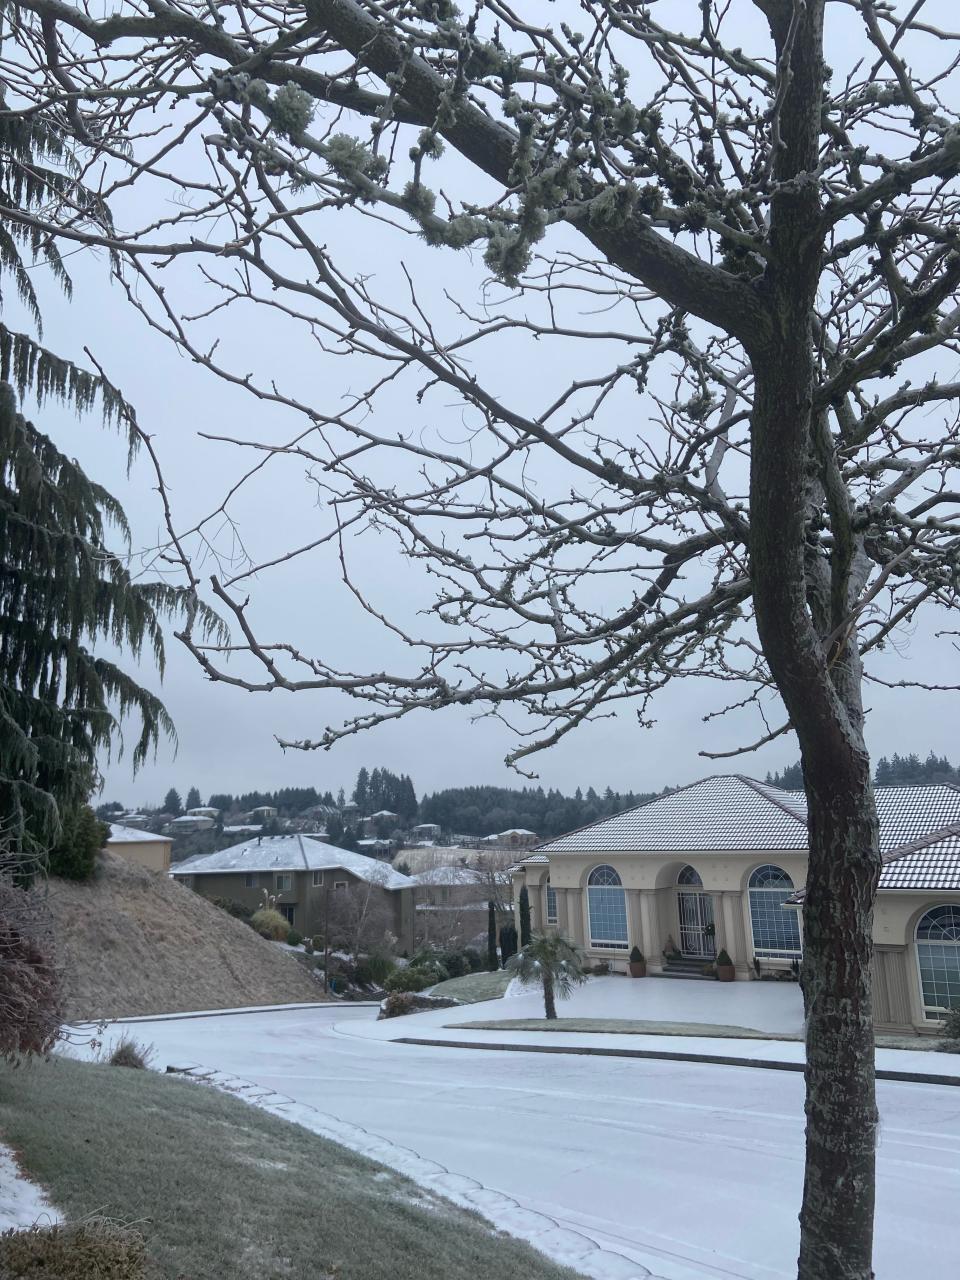 Ice coats the trees, roofs and streets of South Salem on Friday, Dec. 23, 2022.